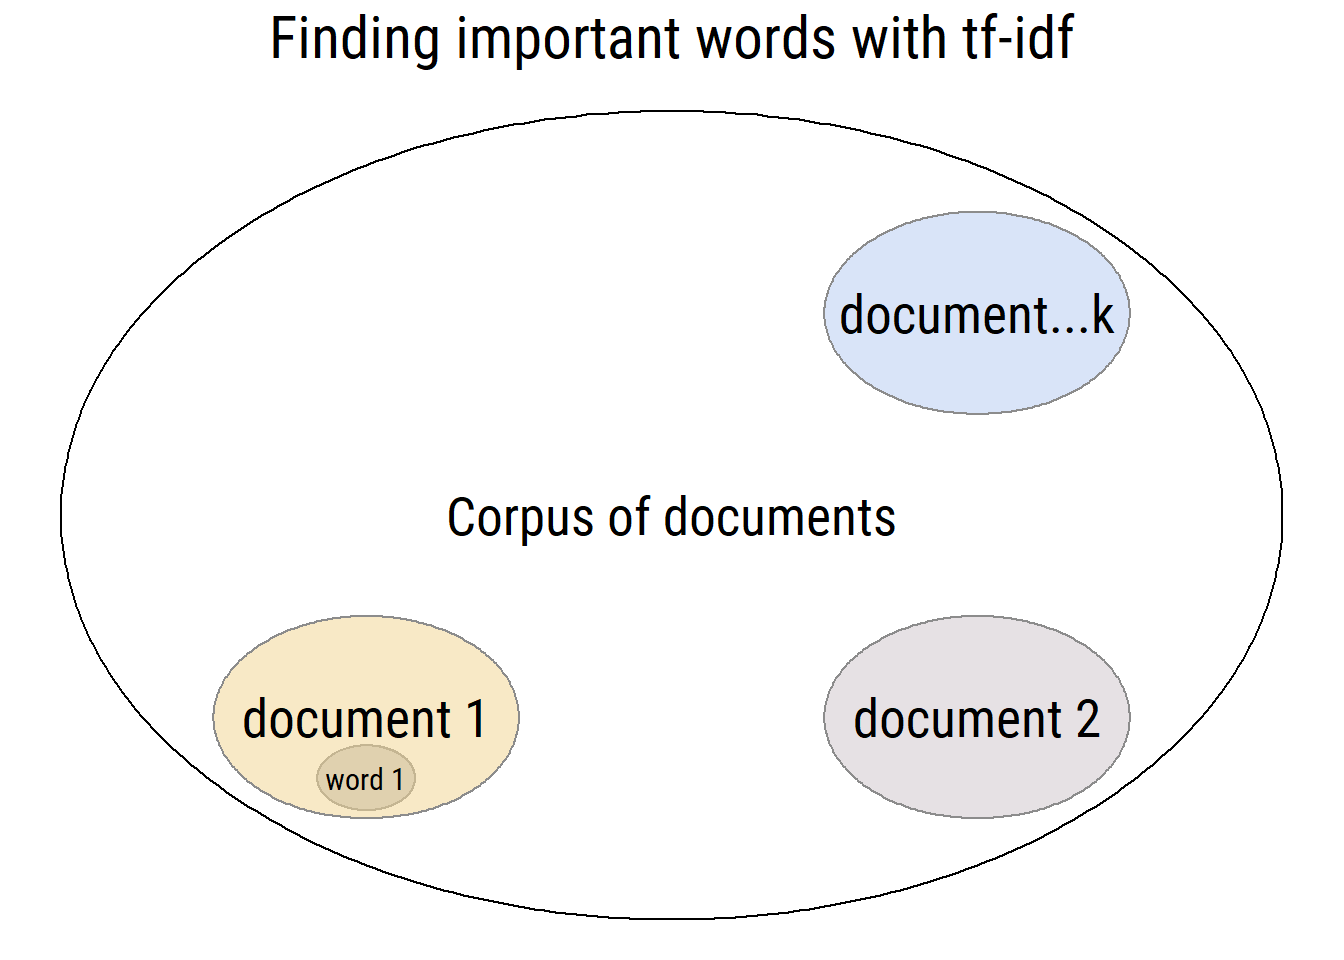 Using tf-idf we can calculate how common a word is within a document and how rare is it across documents